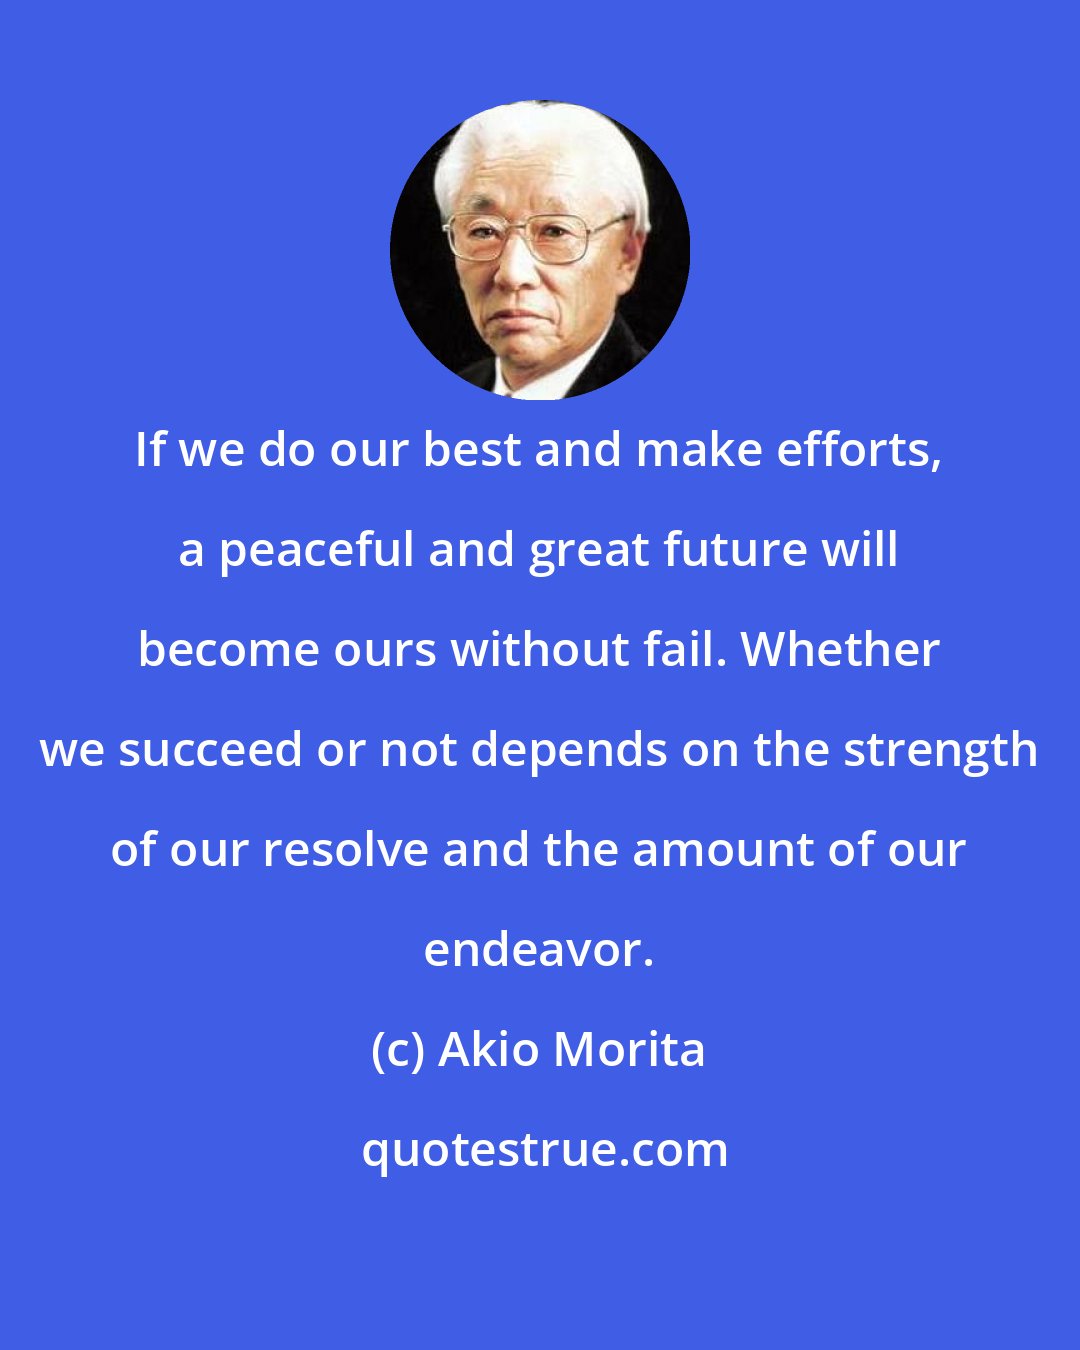 Akio Morita: If we do our best and make efforts, a peaceful and great future will become ours without fail. Whether we succeed or not depends on the strength of our resolve and the amount of our endeavor.